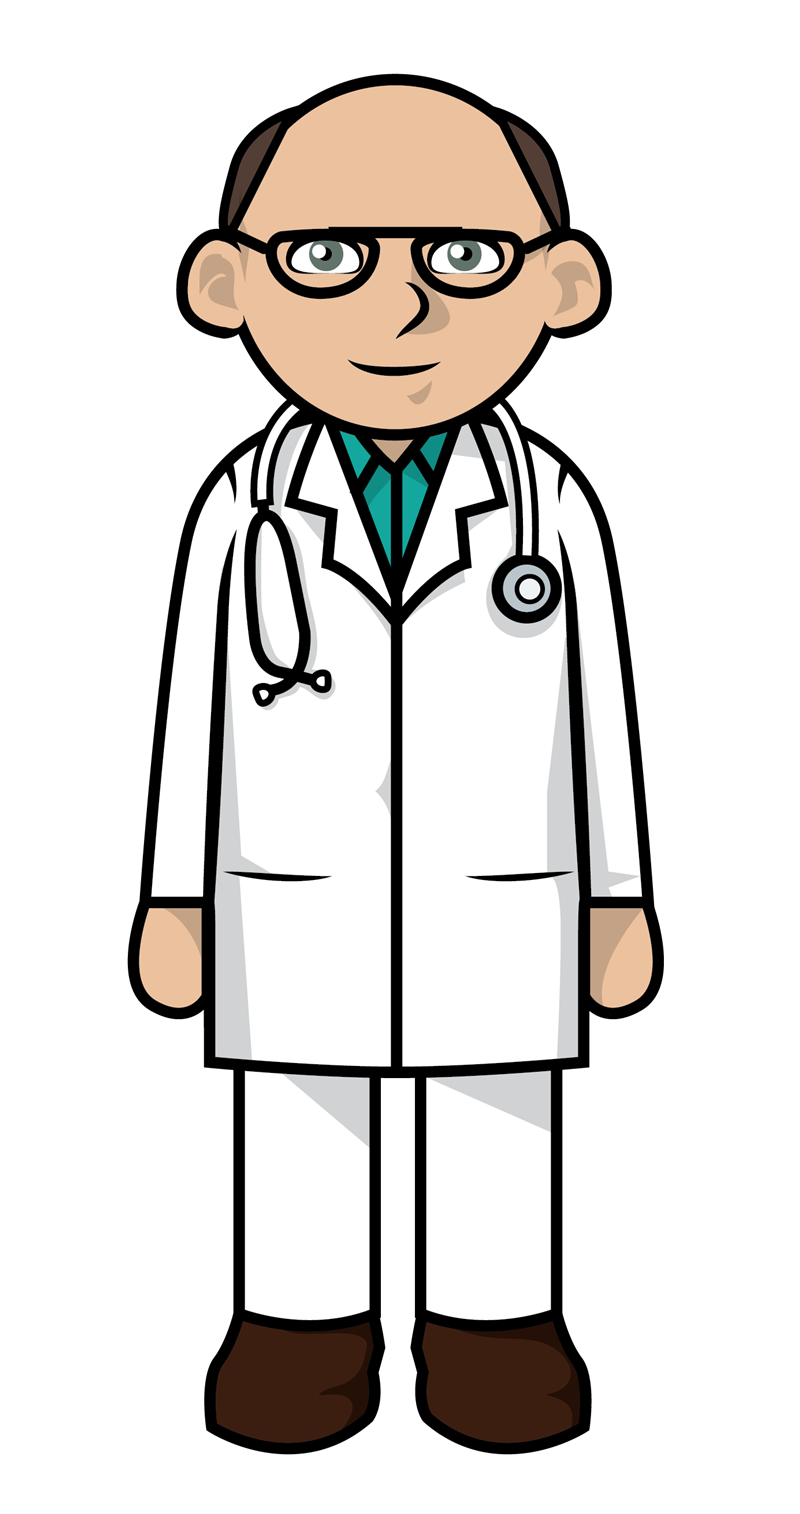 Searching for a doctor clip art for use on your projects? Stop you search here